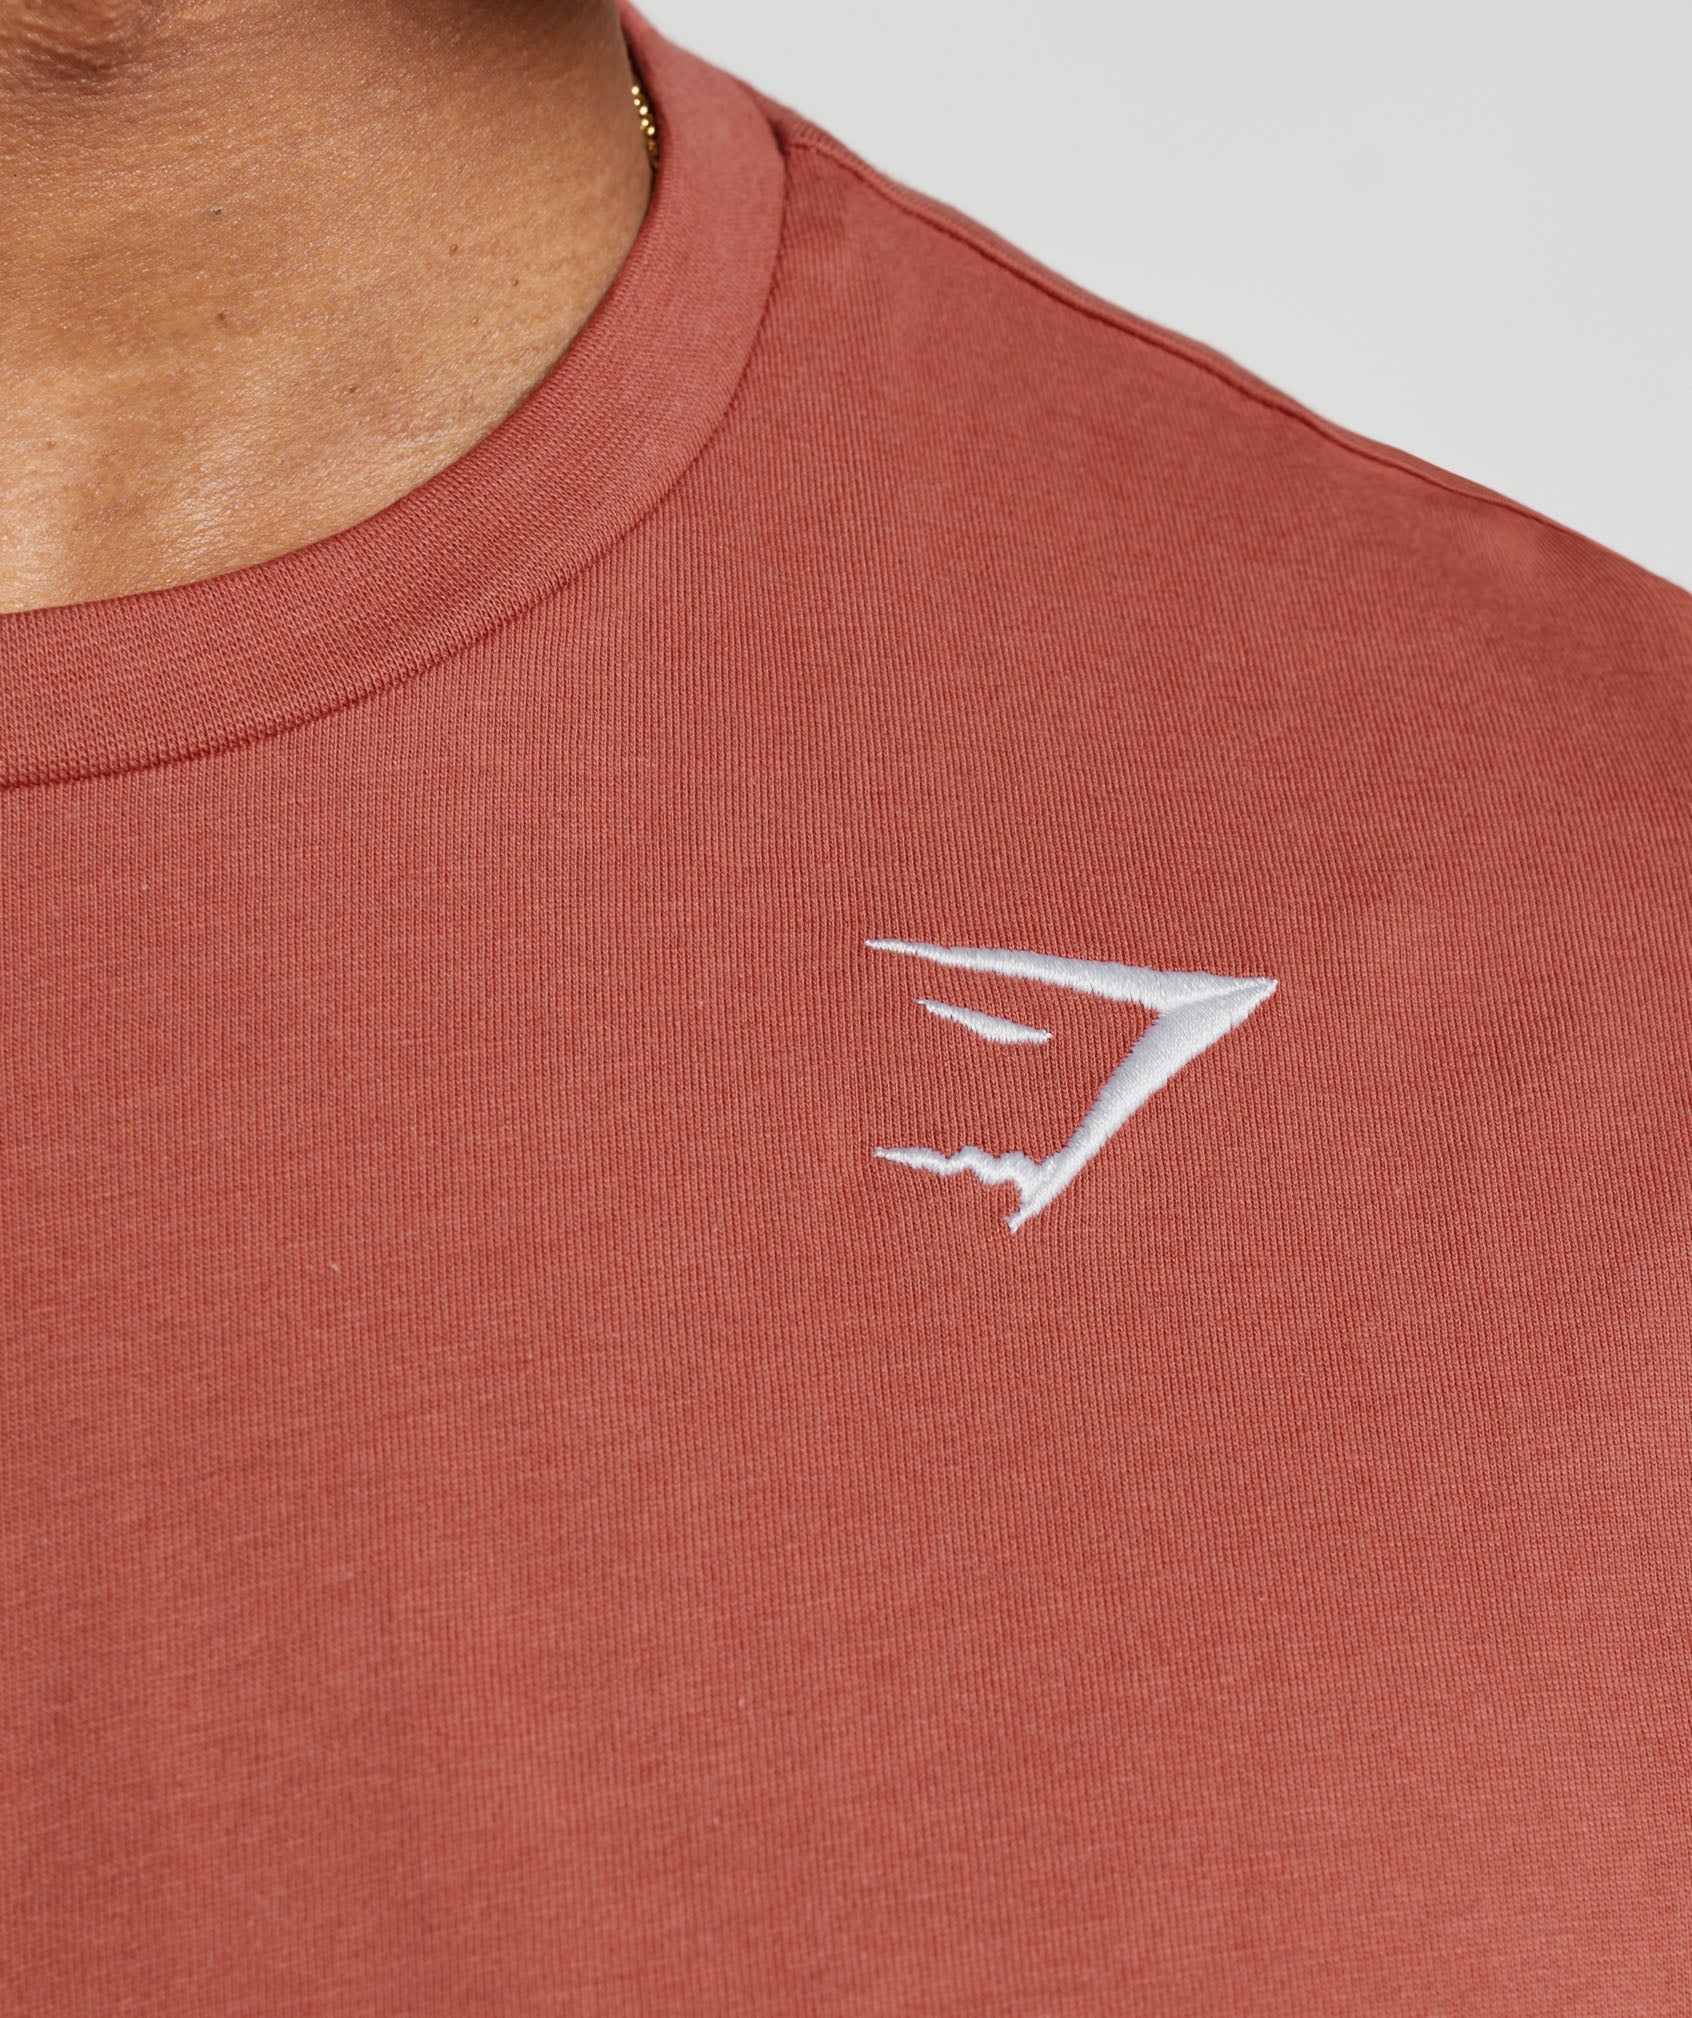 Crest T-Shirt in Persimmon Red - view 3